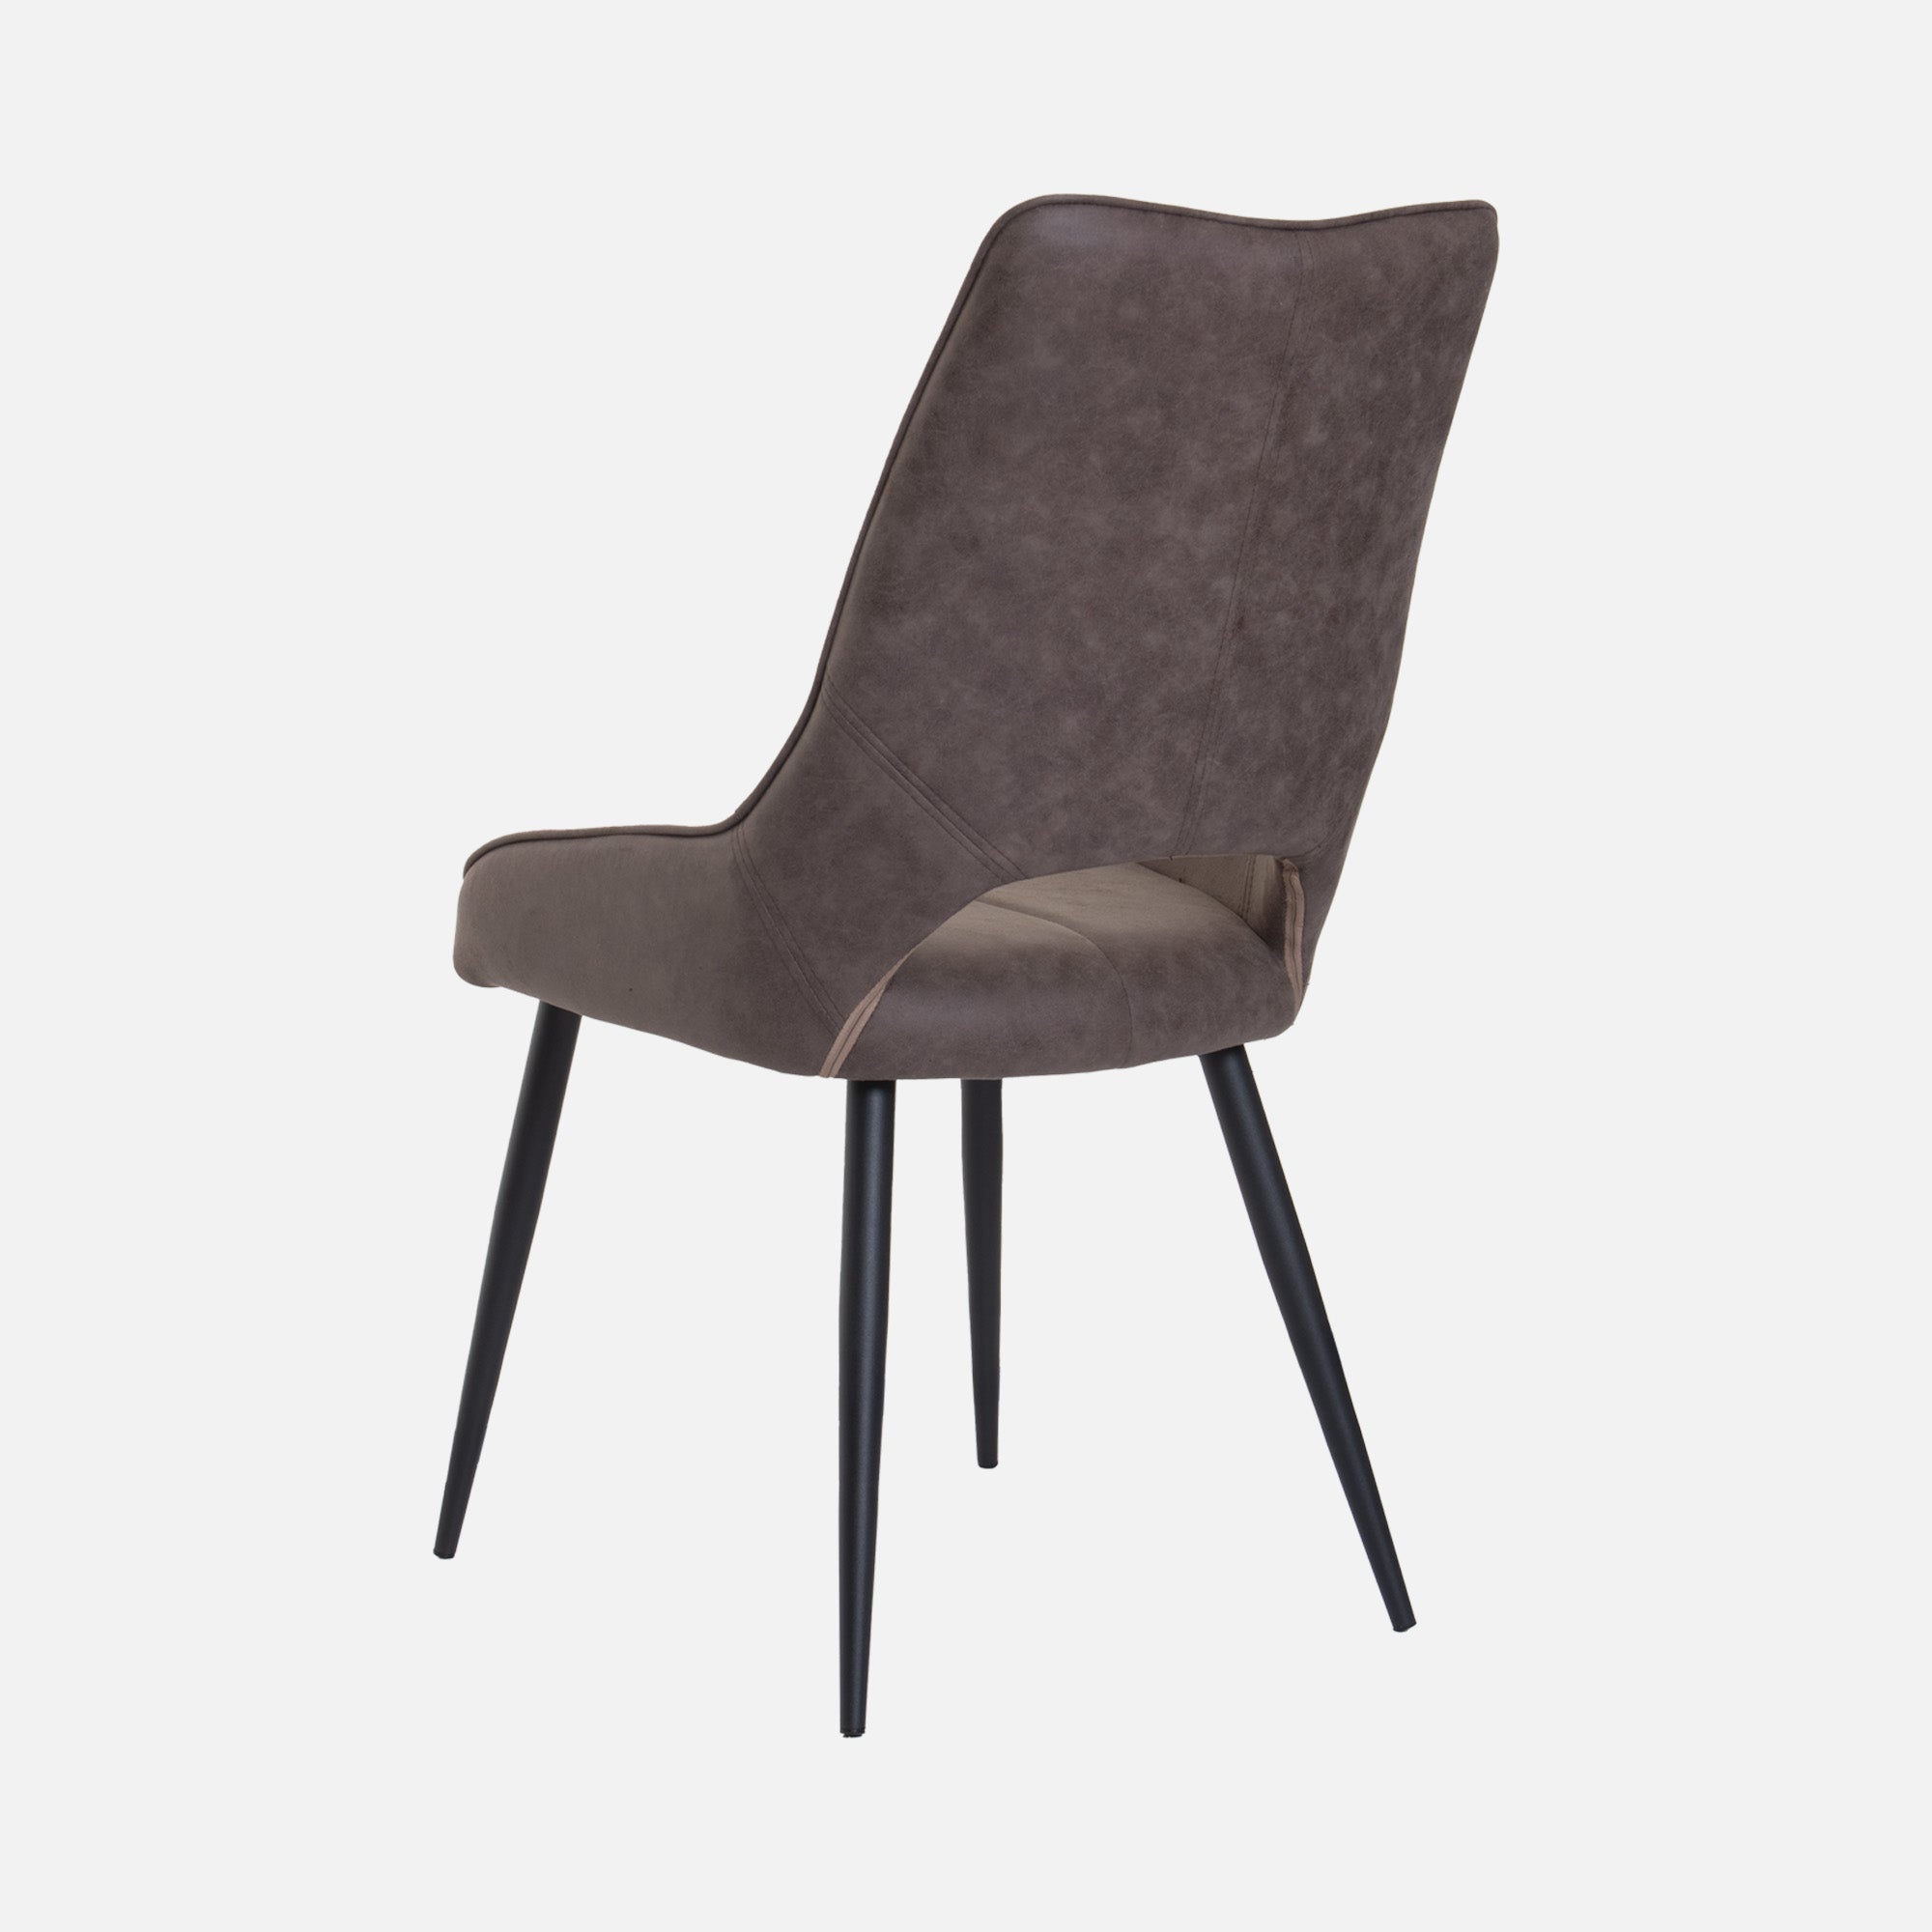 Marco - Dining Chair In Vintage Fabric Brown